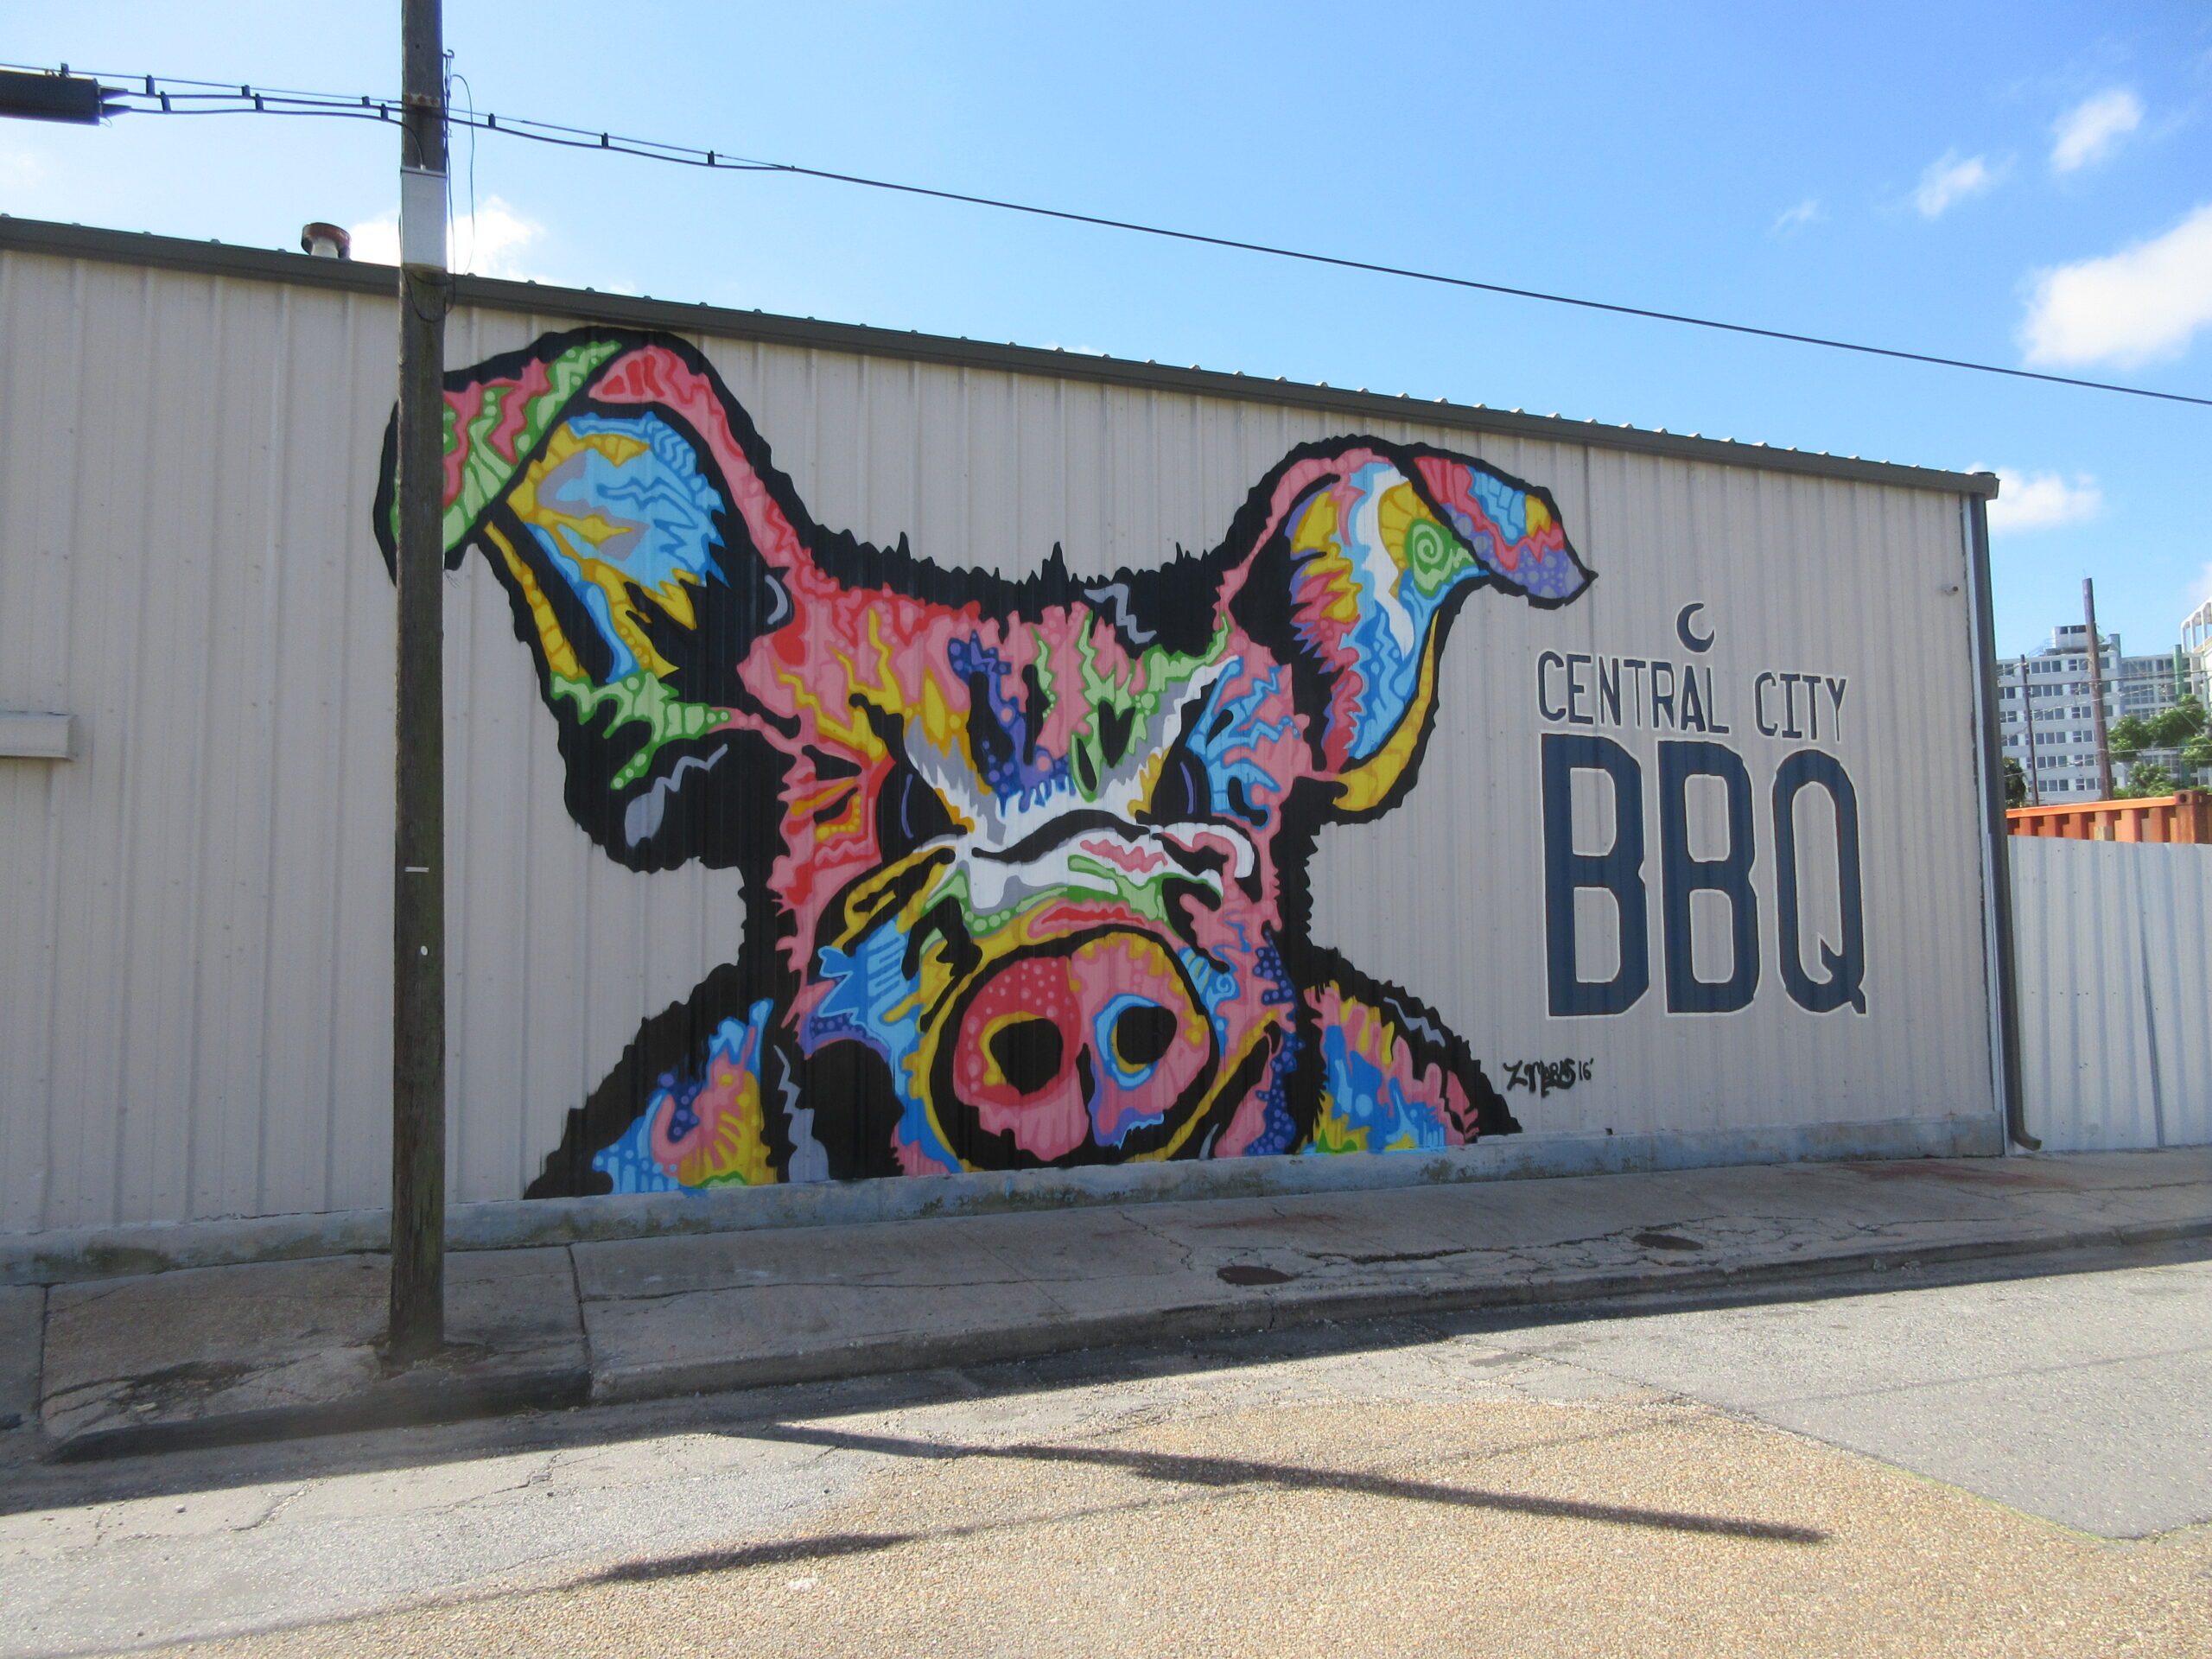 Central City BBQ Signage